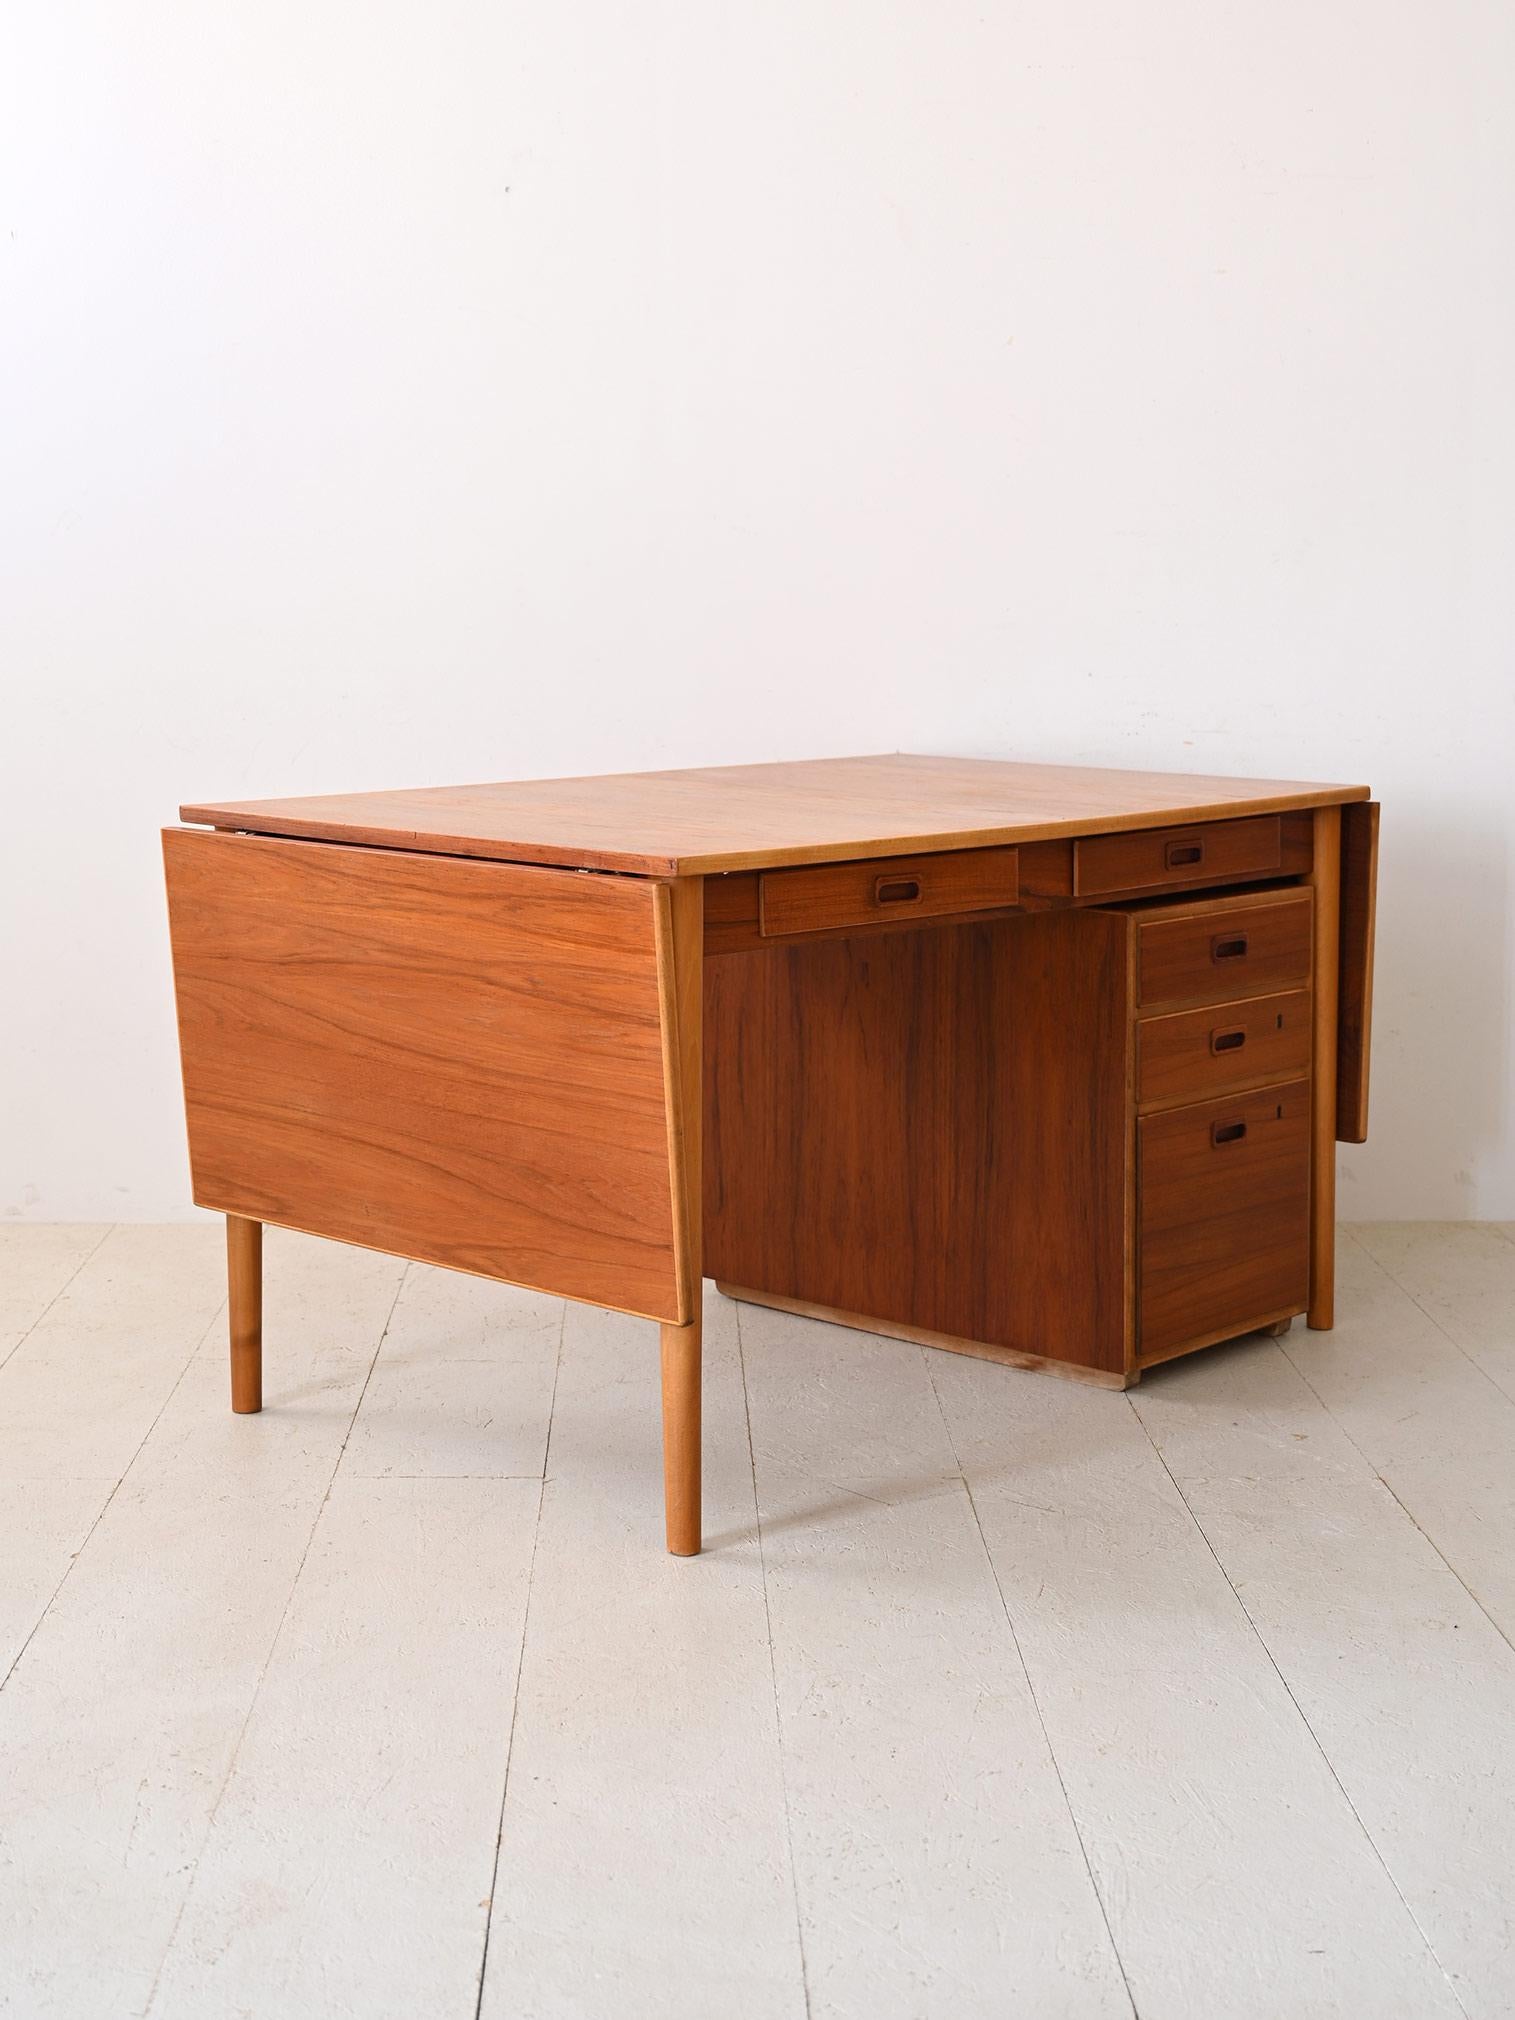 Mid-20th Century Retro desk by Nils Jonsson with drawers For Sale